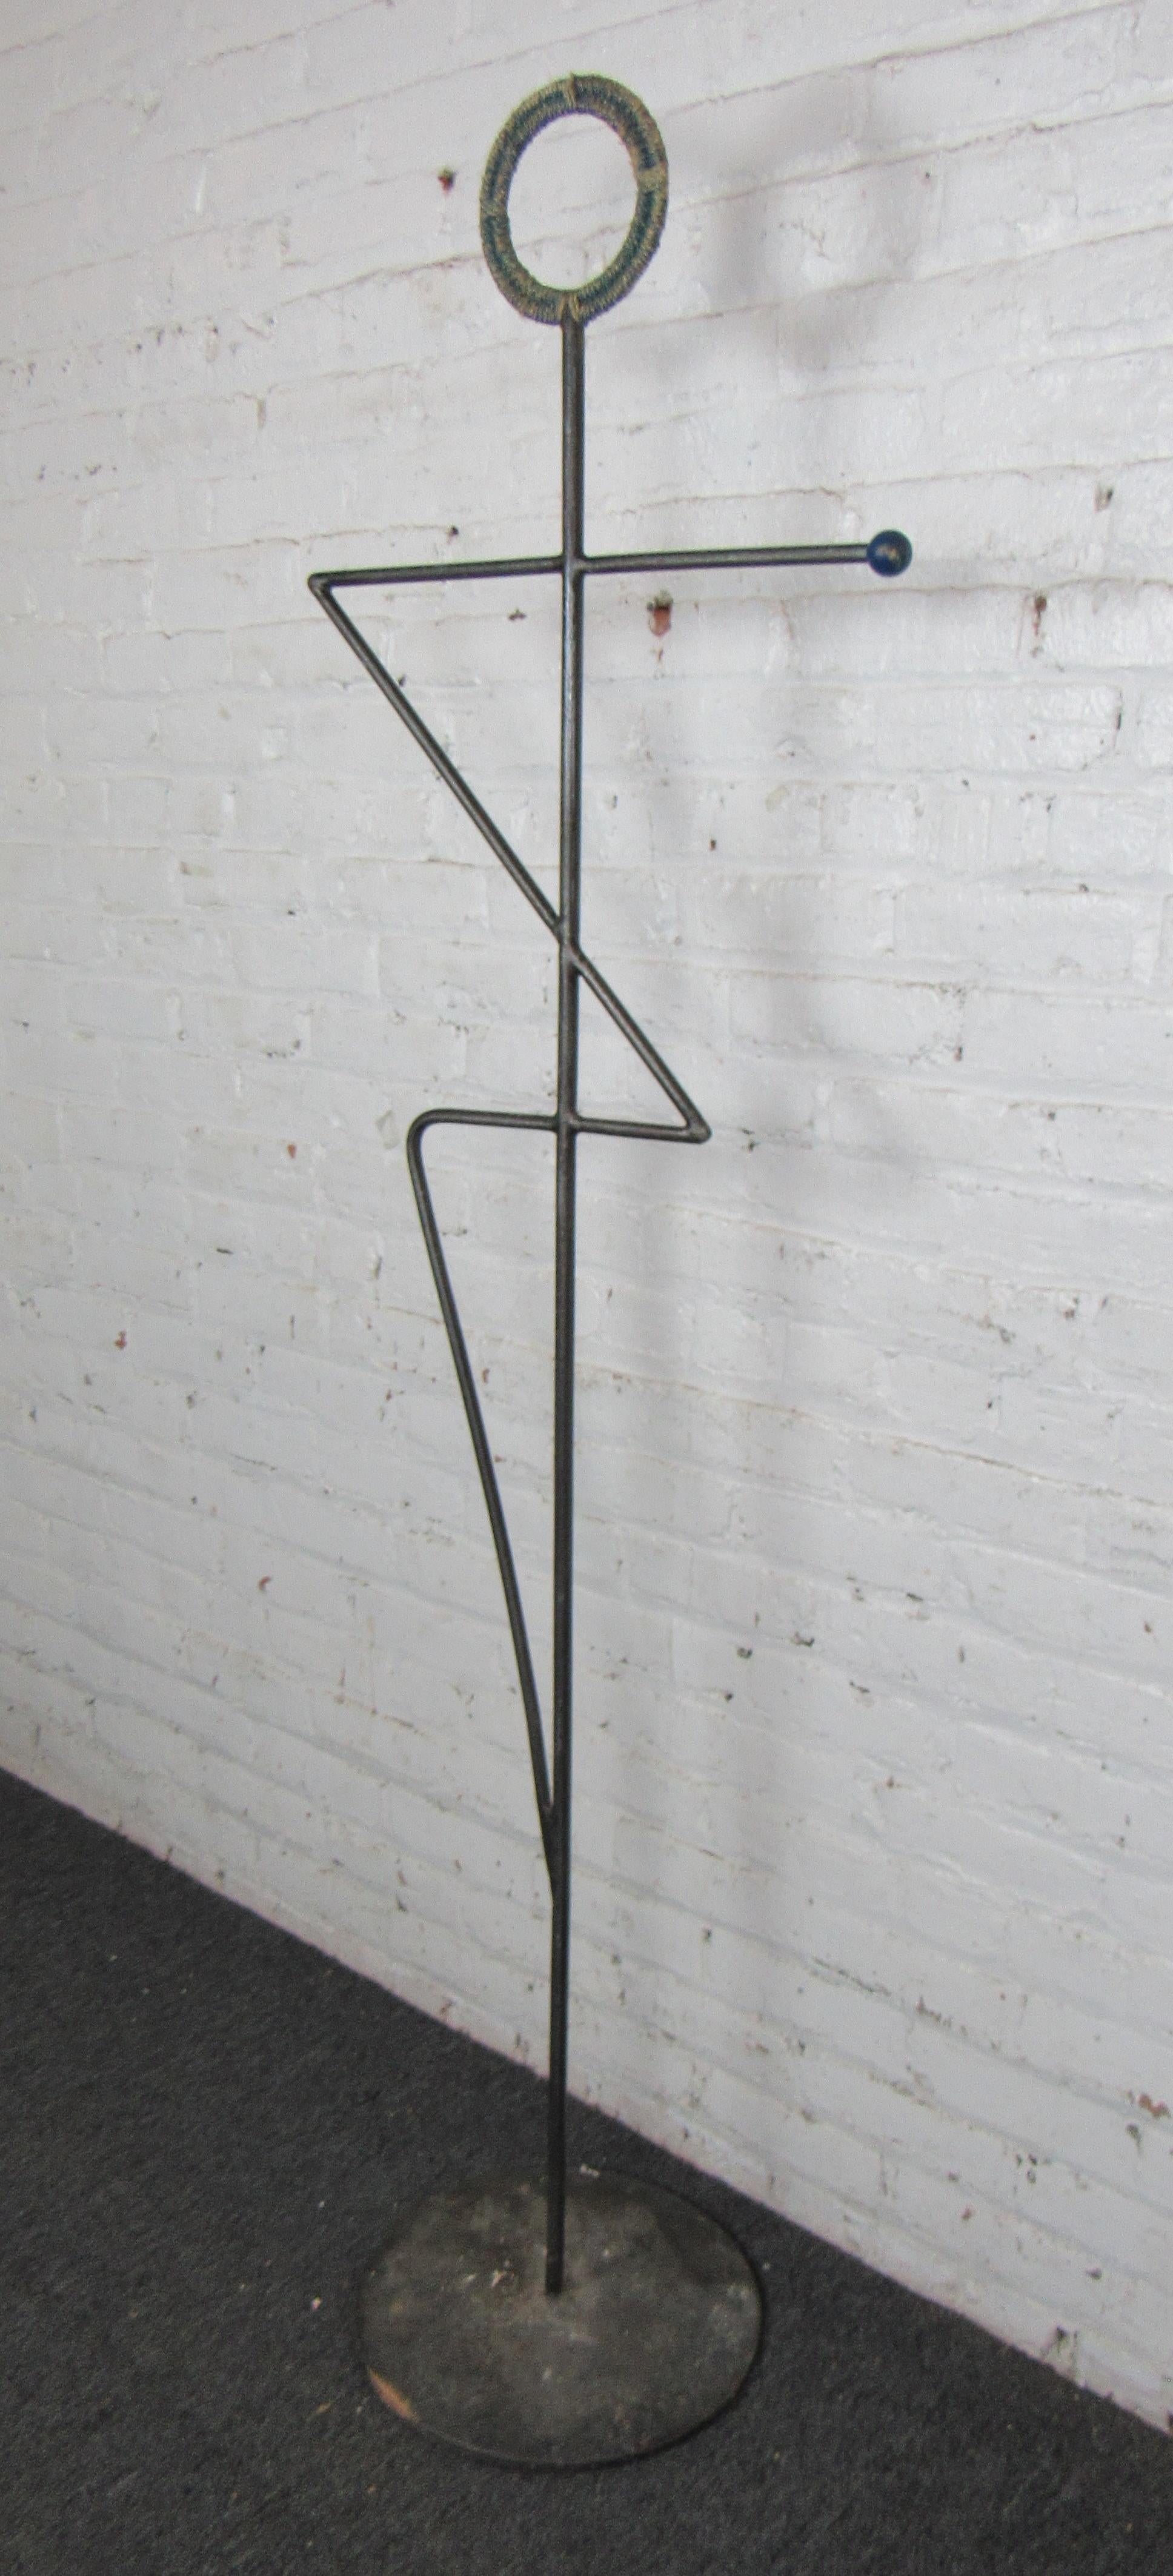 Mid-century design metal coat hanger. Rope wrapped hat/coat hanger on top with a blue dye. 
(Please confirm item location - NY or NJ - with dealer).
 